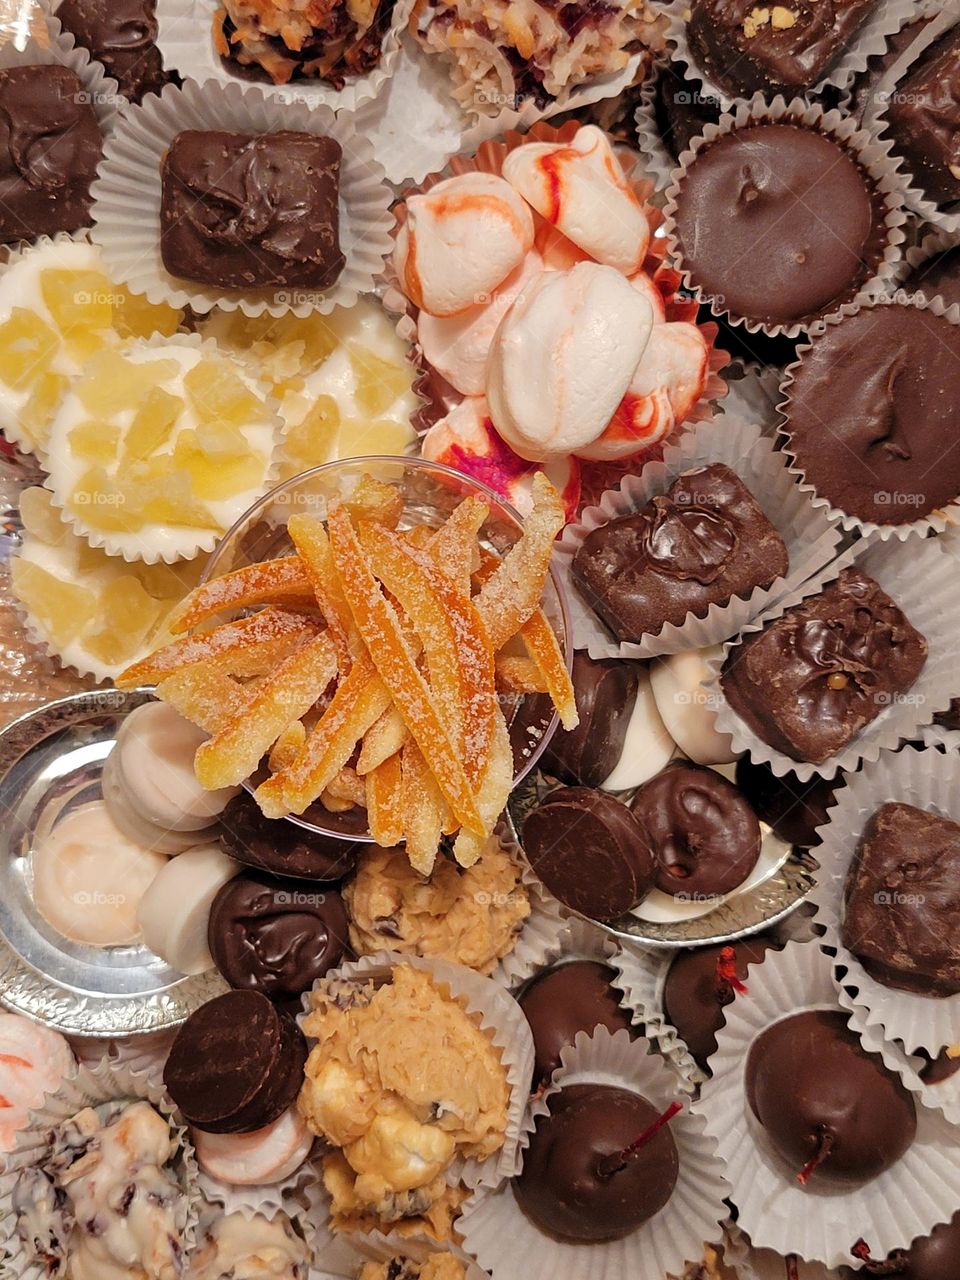 Candy Tray, Chocolate, nougat, candied orange peels, homemade candy confections